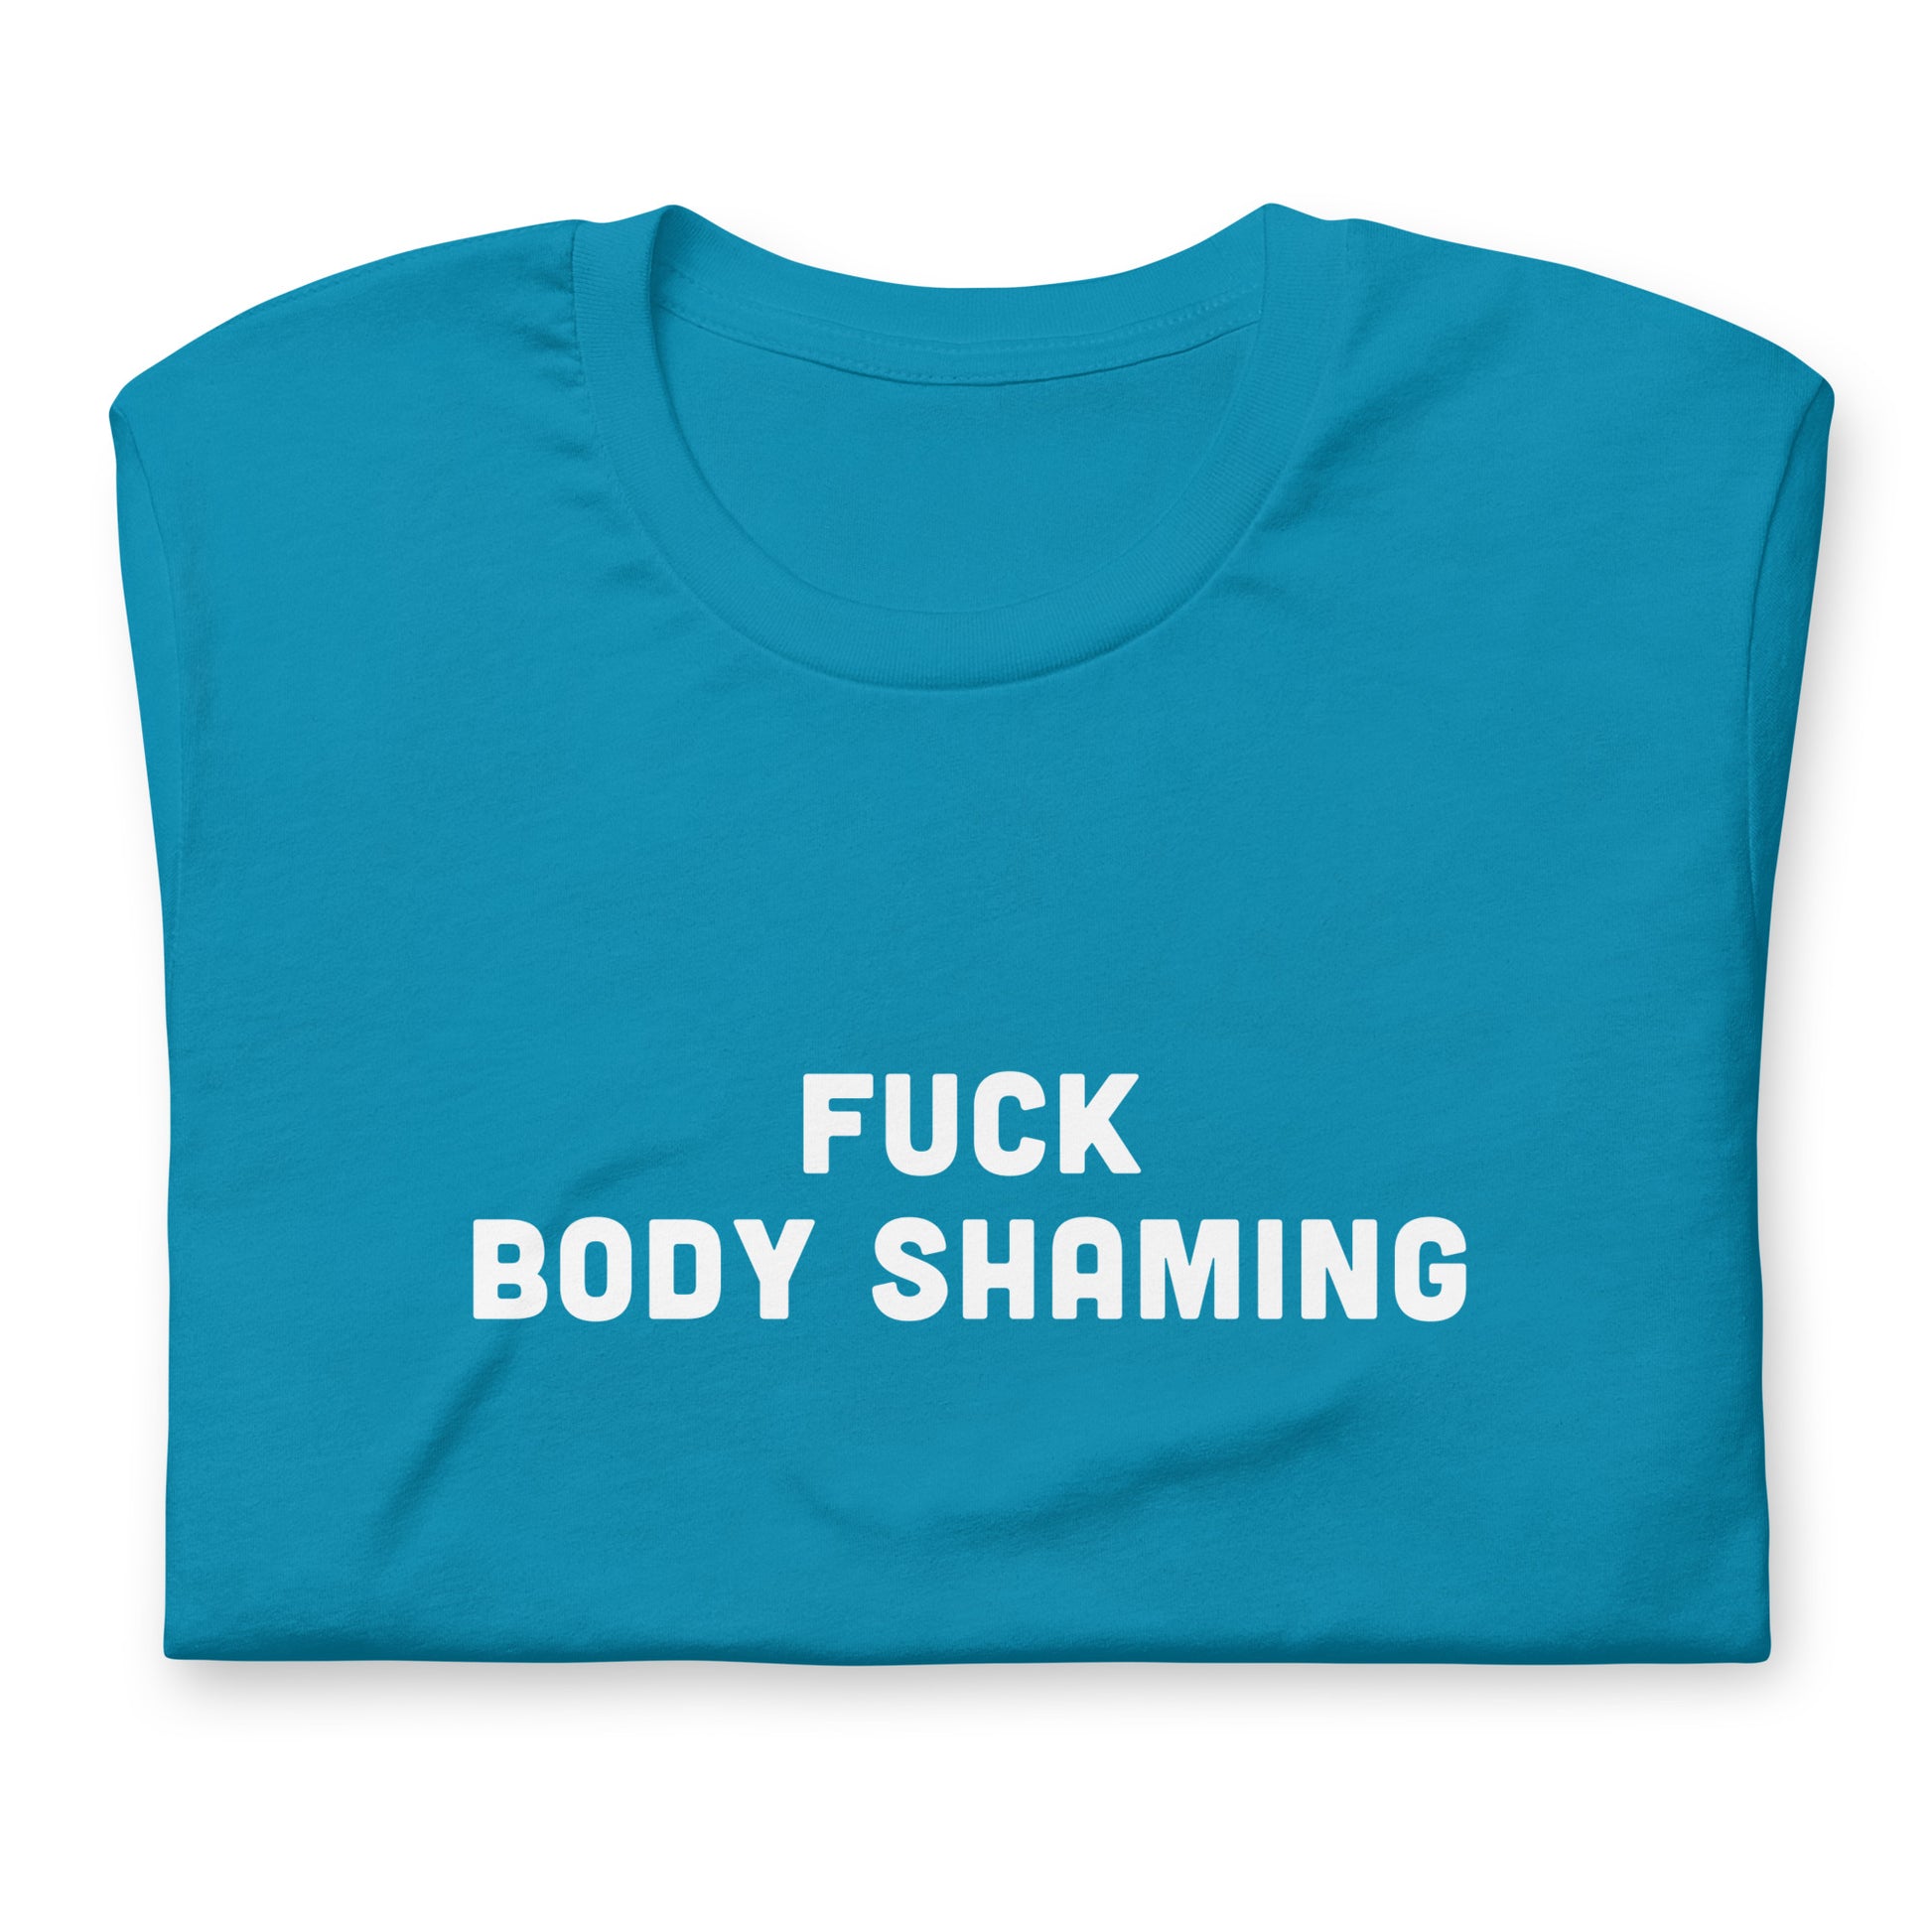 Fuck Body Shaming T-shirt Size L Color Navy